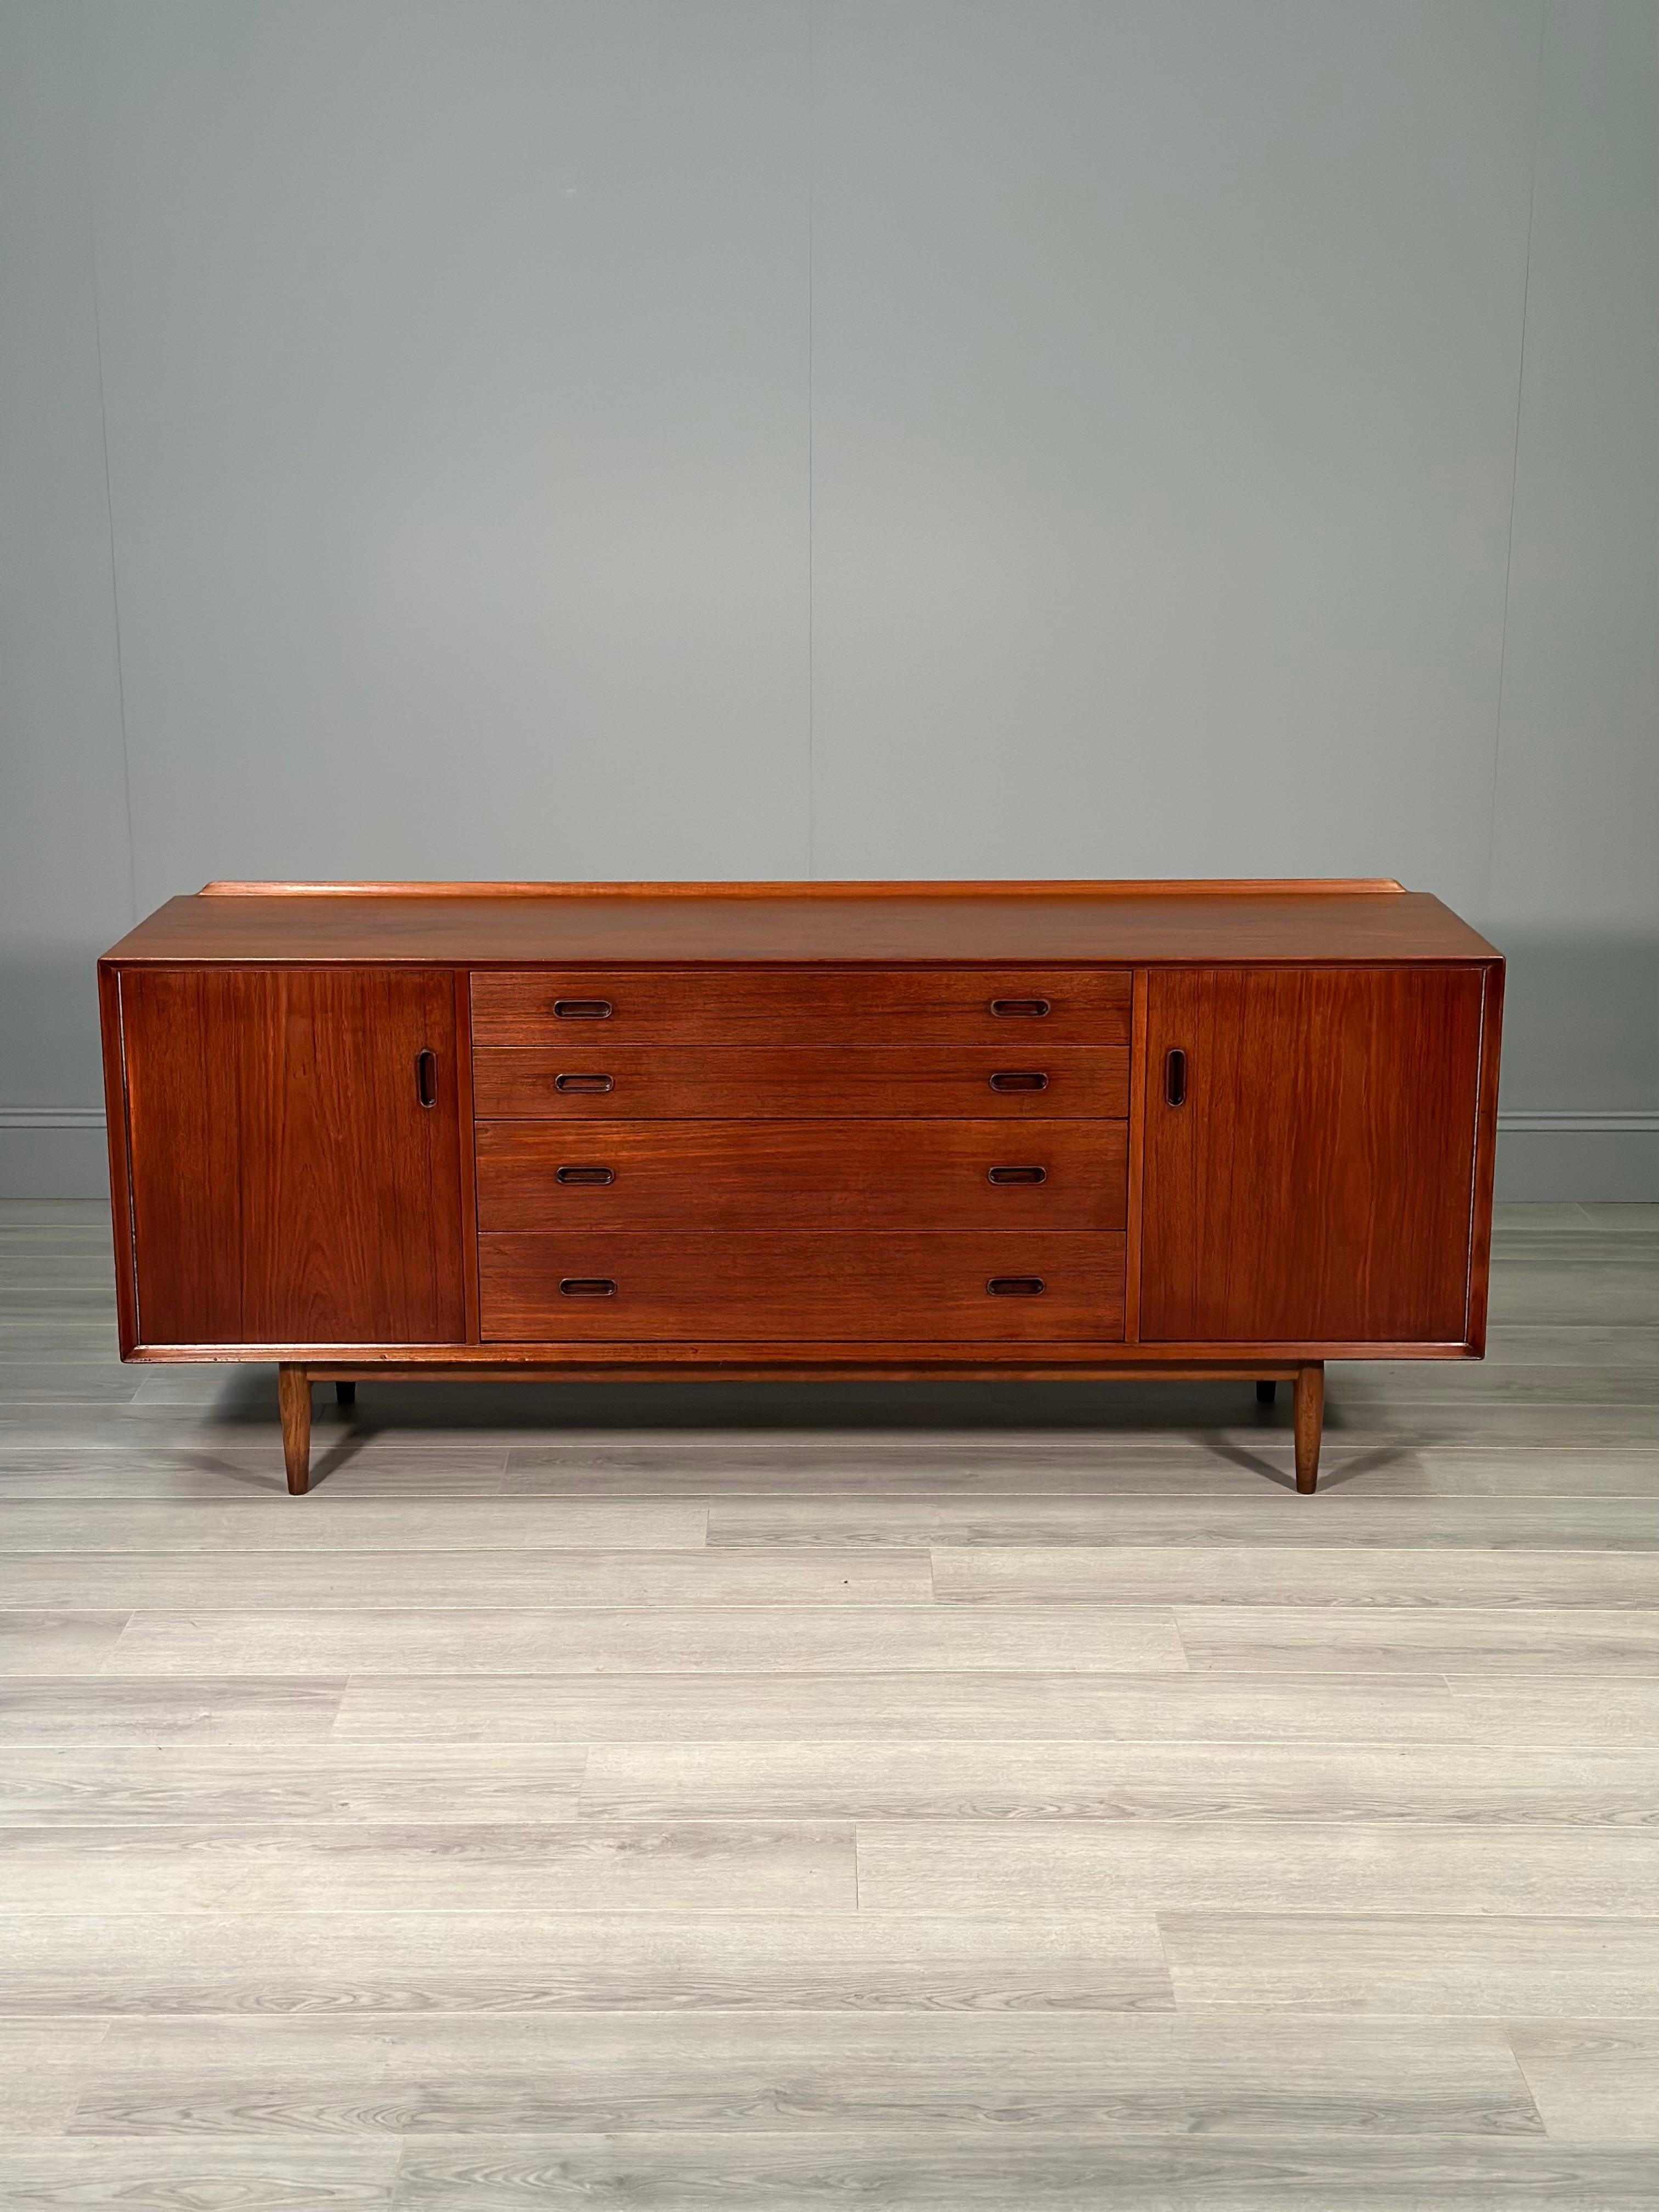 A quality Danish sideboard designed by Arne Vodder for Sibast dating 1955. Arne Vodder is one of Denmark’s top designers with this early model sideboard rarely coming to market. The sideboard consists of two side cupboards each with adjustable